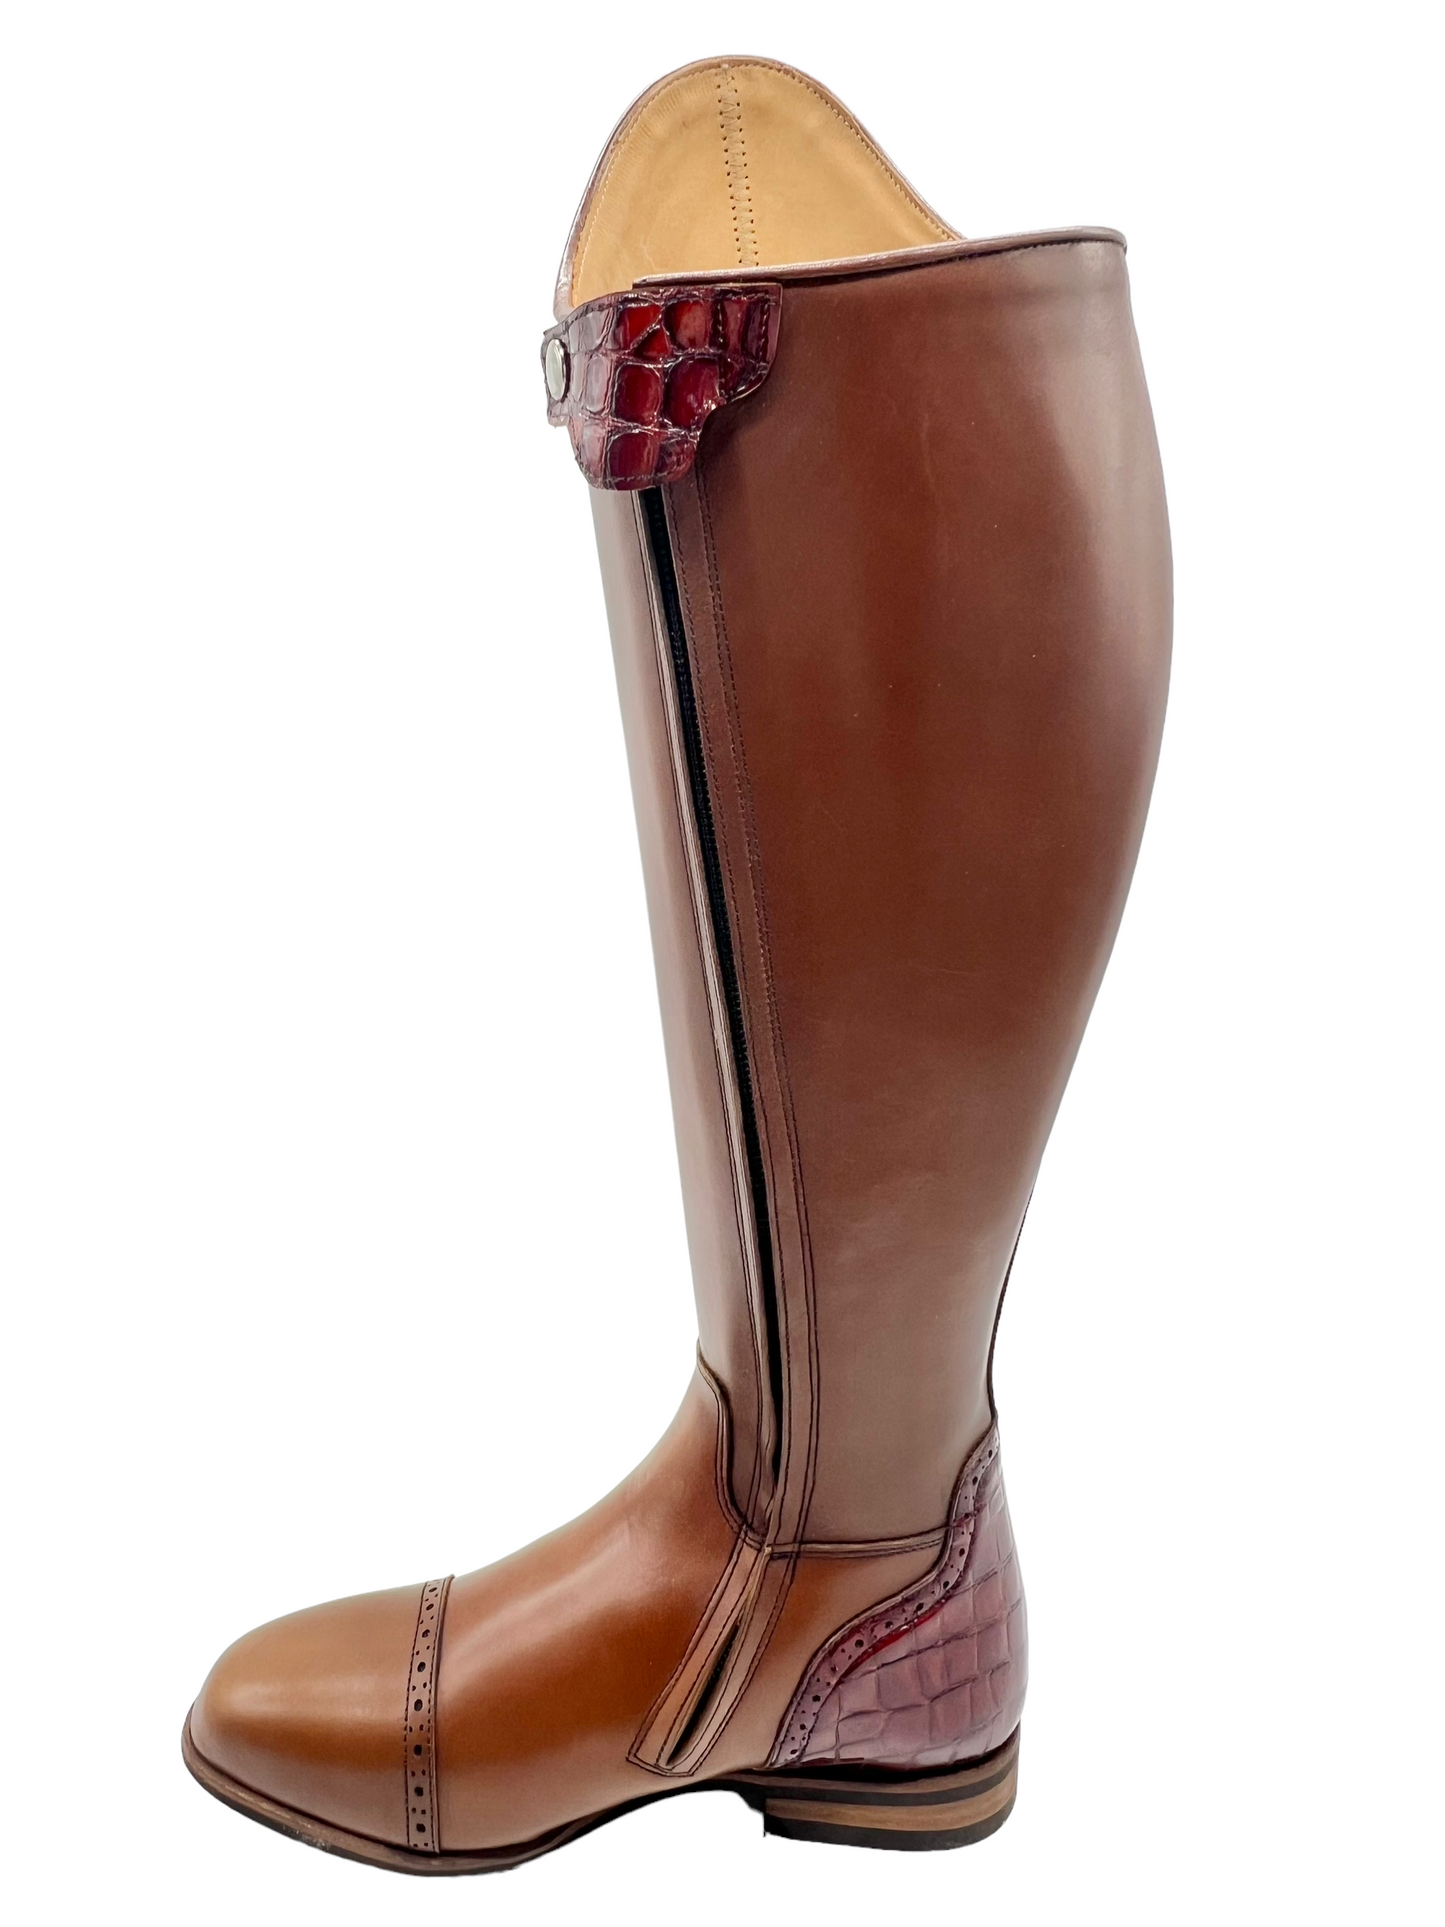 Celeris Brown leather & Patent Croc Embossed Passage Riding Boots